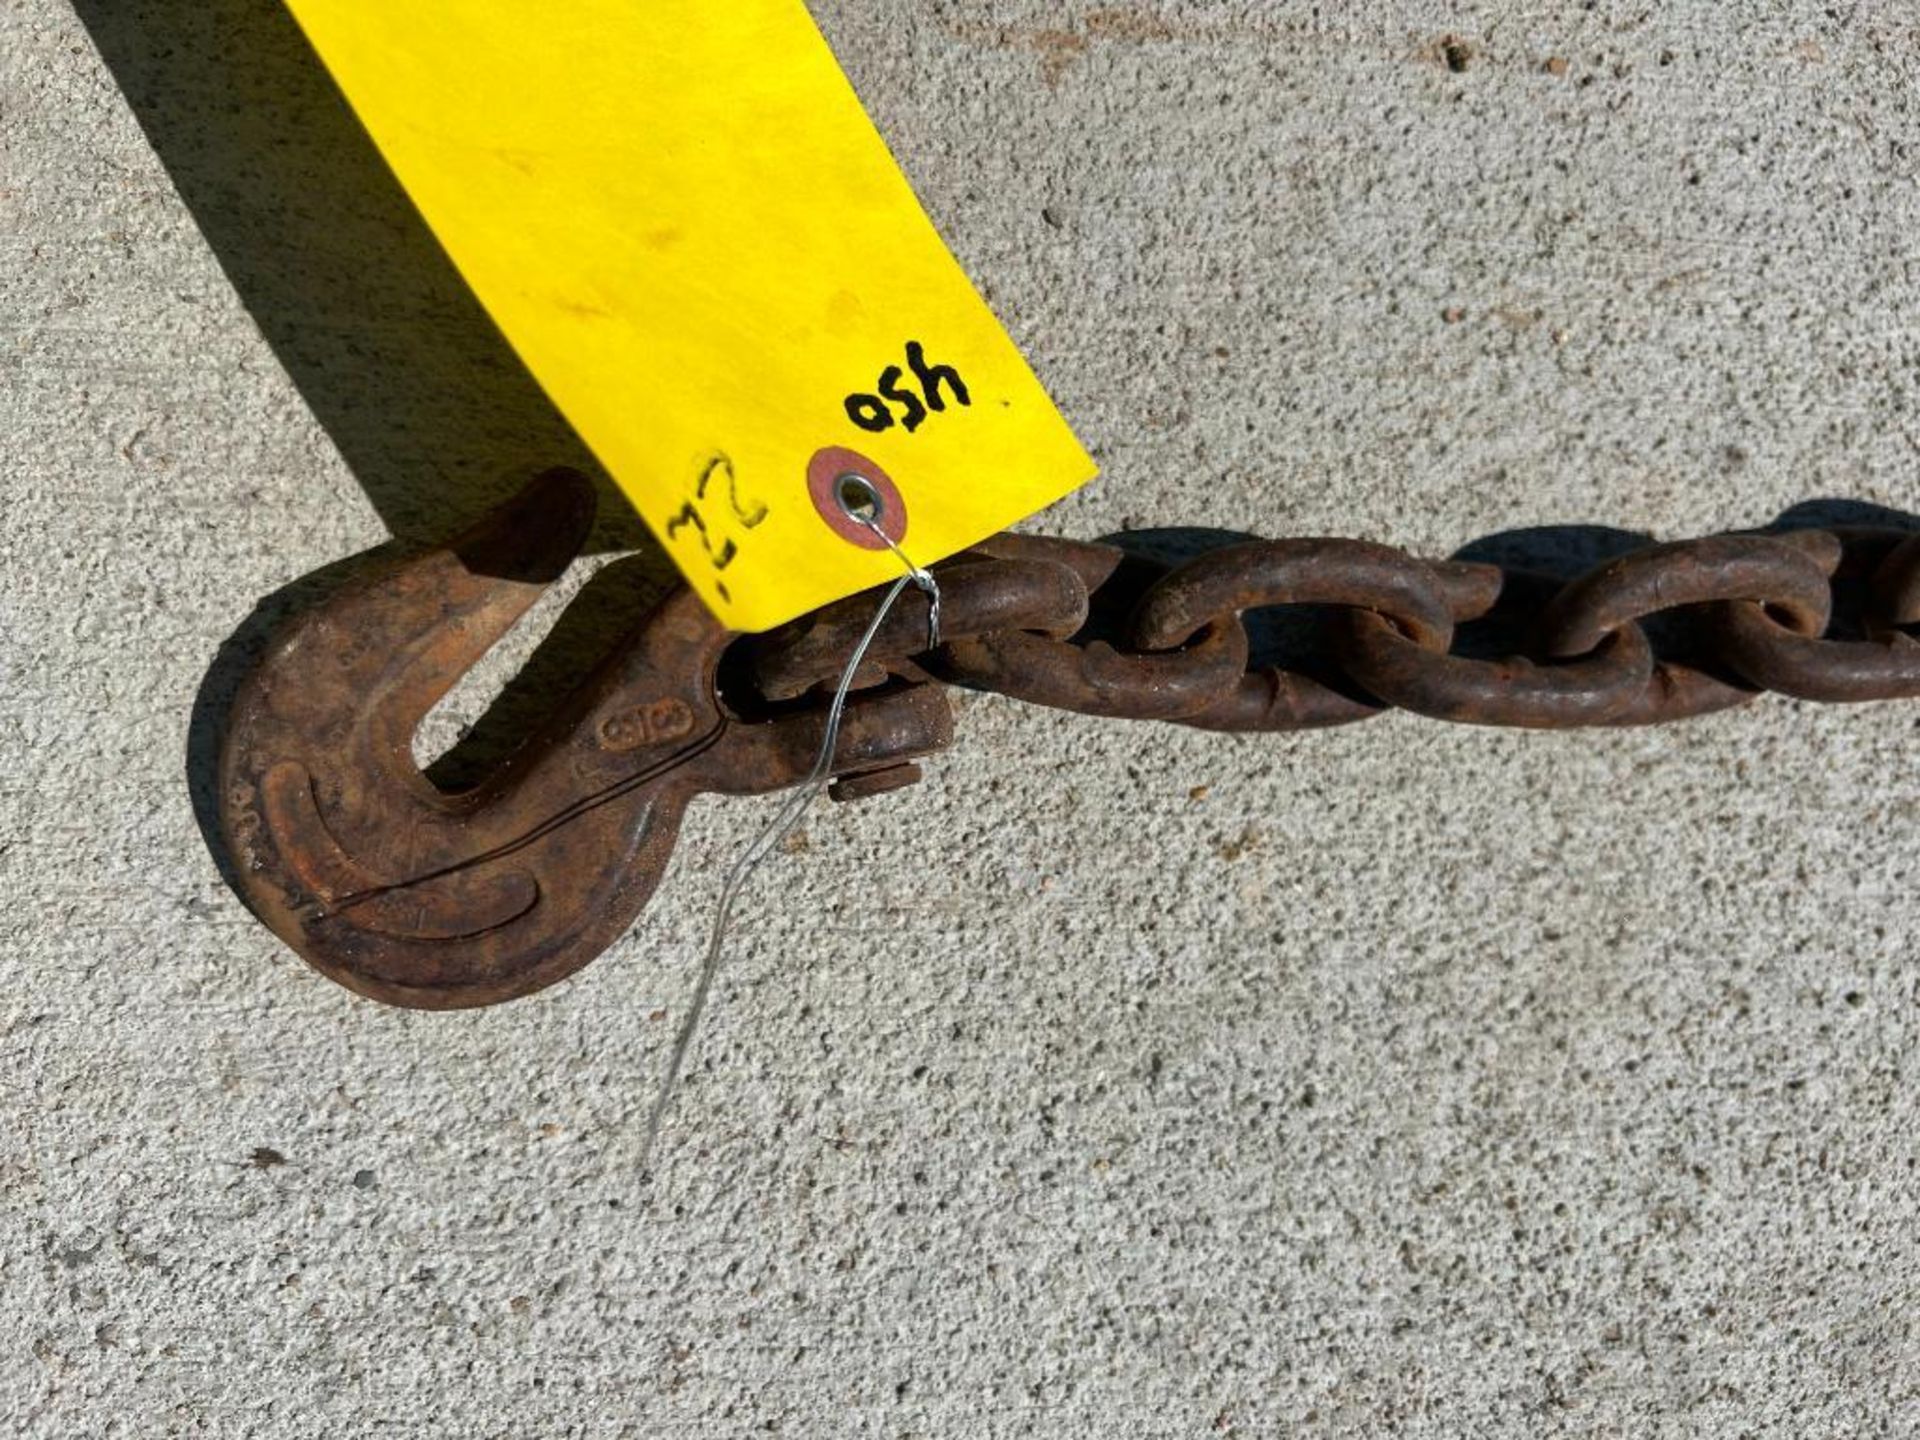 22' Log Chain. Located in Altamont, IL - Image 2 of 3